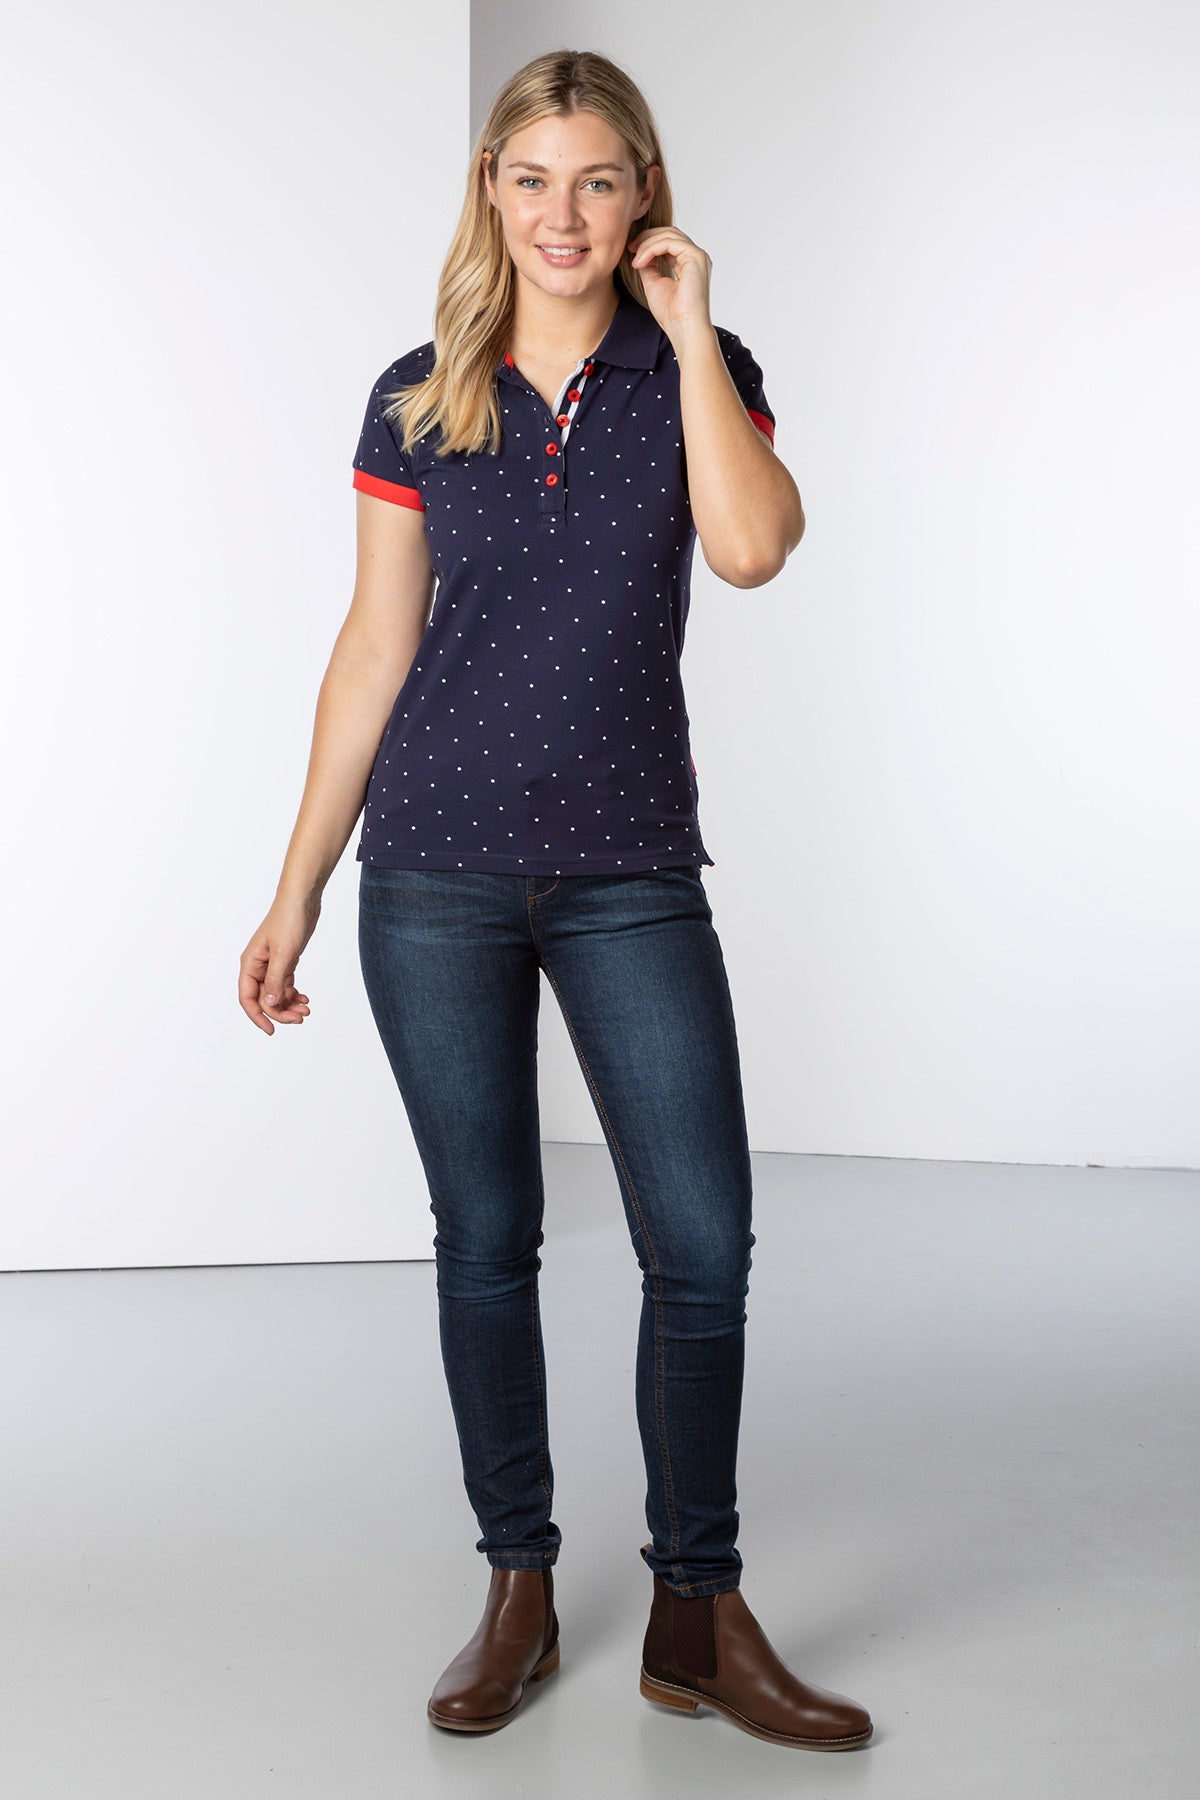 Ladies Navy Polo Shirt UK | Women's Polo Shirts & Tops | Rydale